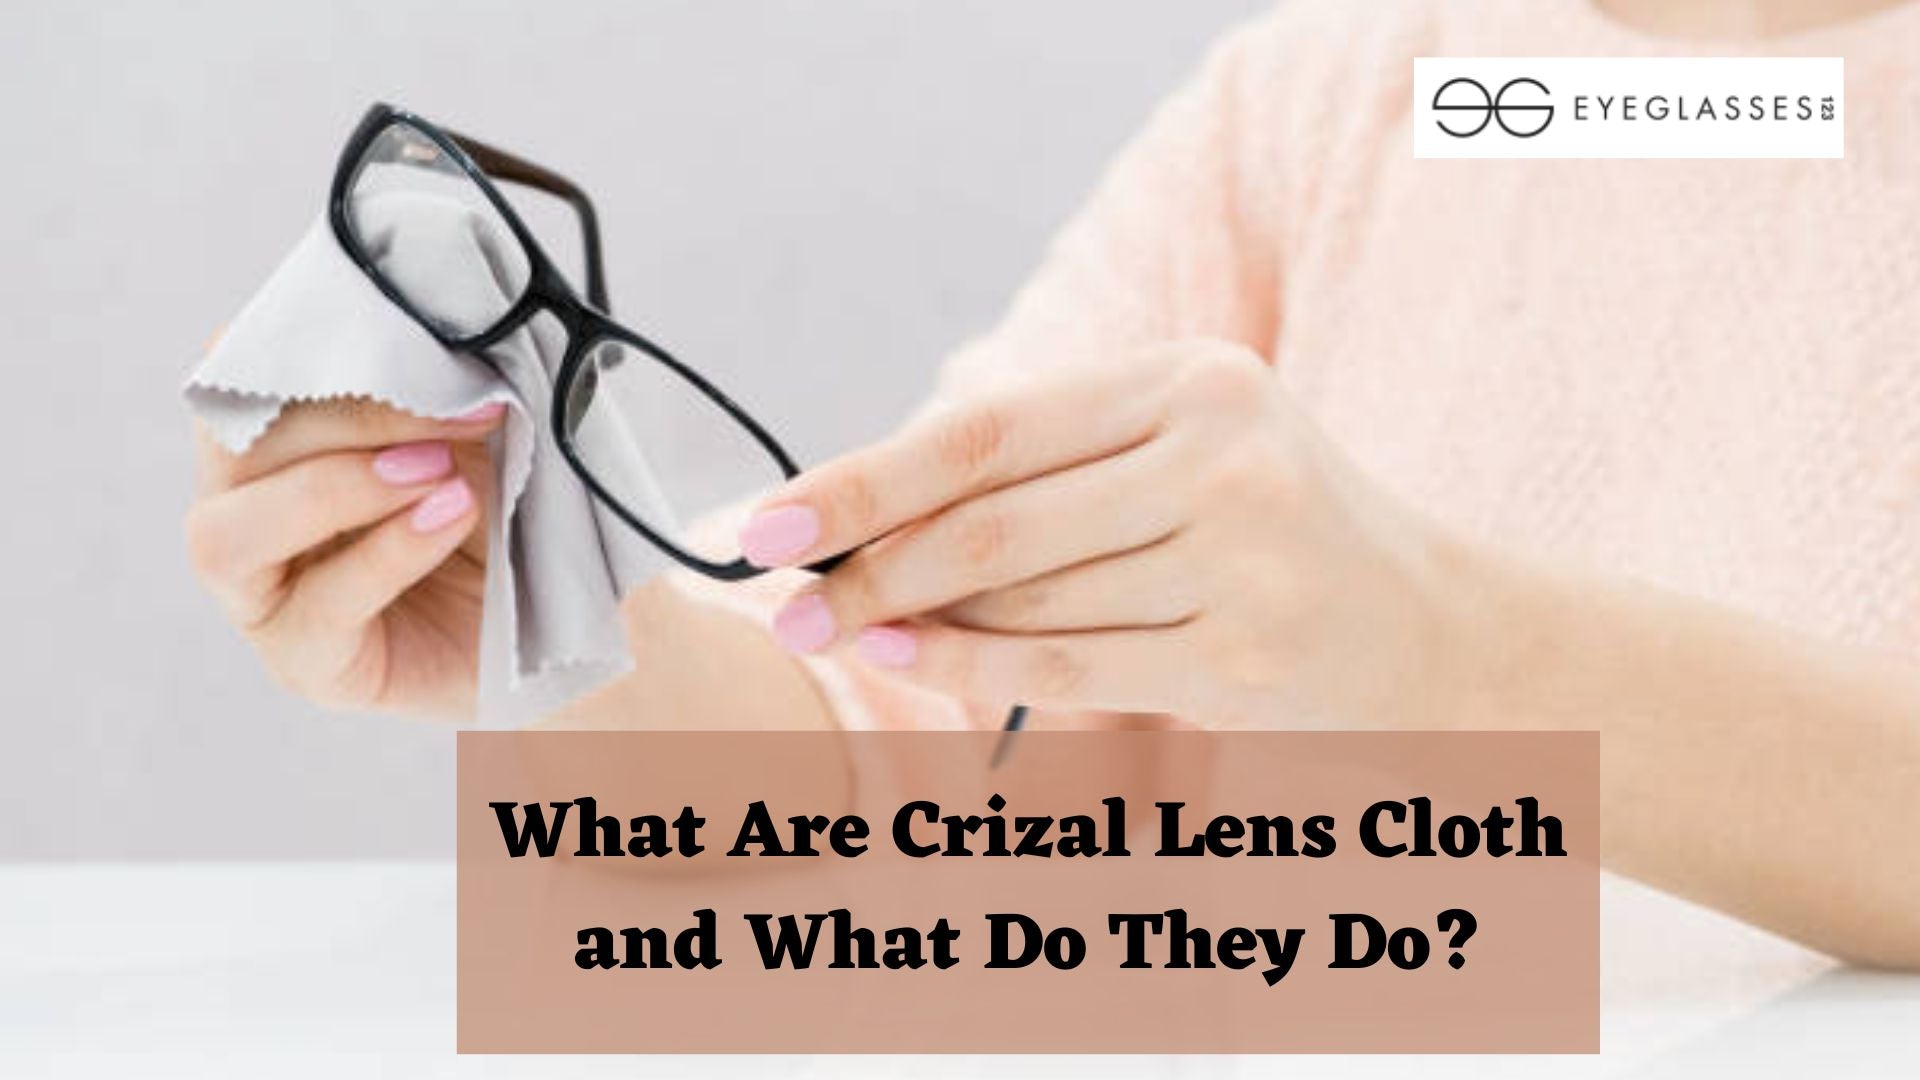 What Are Crizal Lens Cloth and What Do They Do?